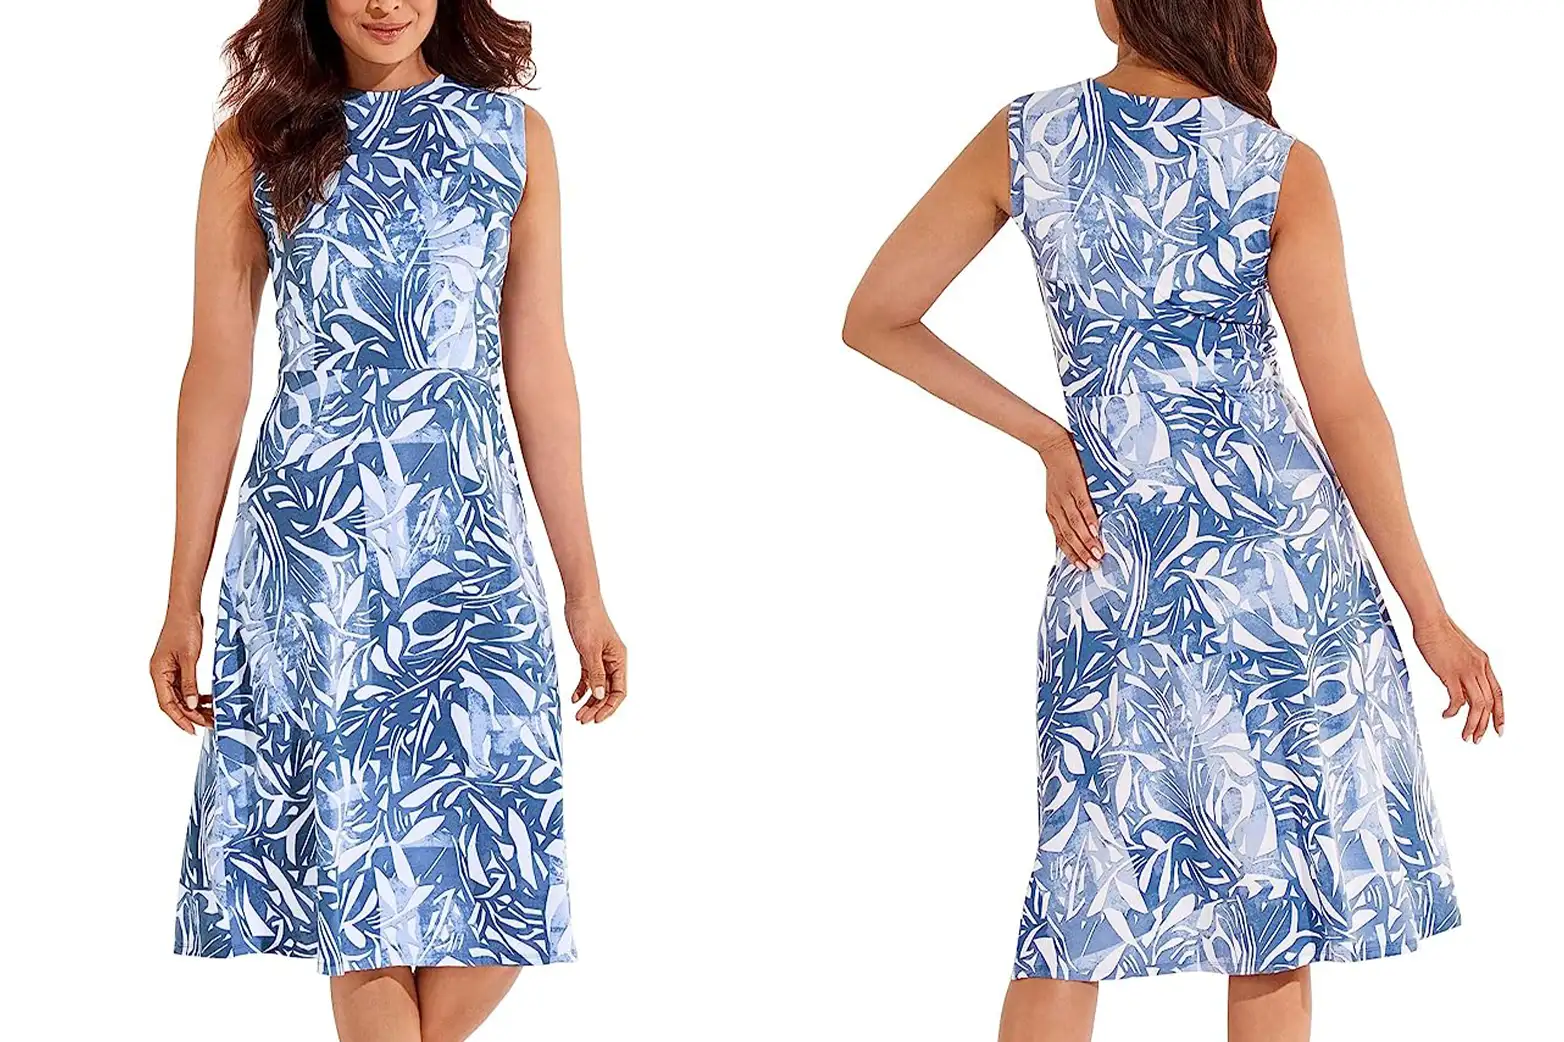 Female modeling blue and white floral patterned dress front and back 